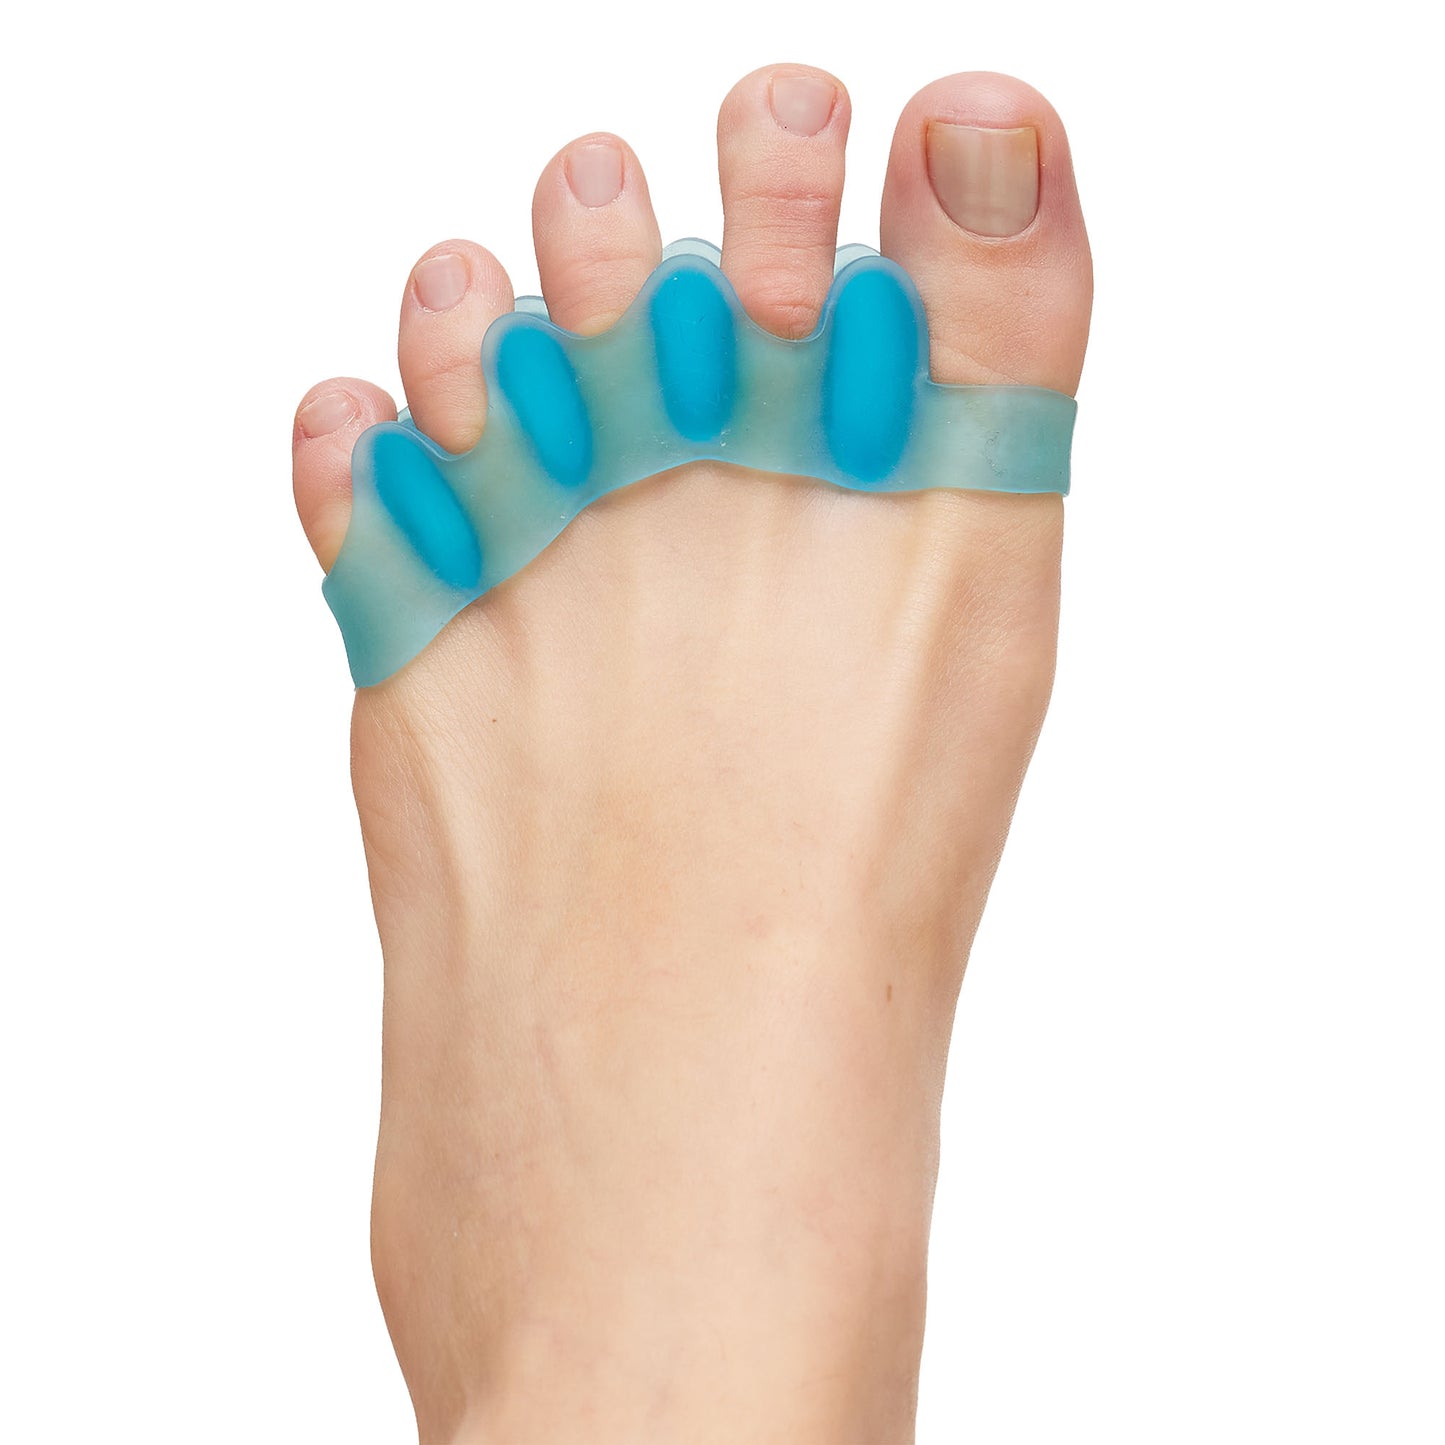 Five Loop Toe Spacer for Toe Realignment